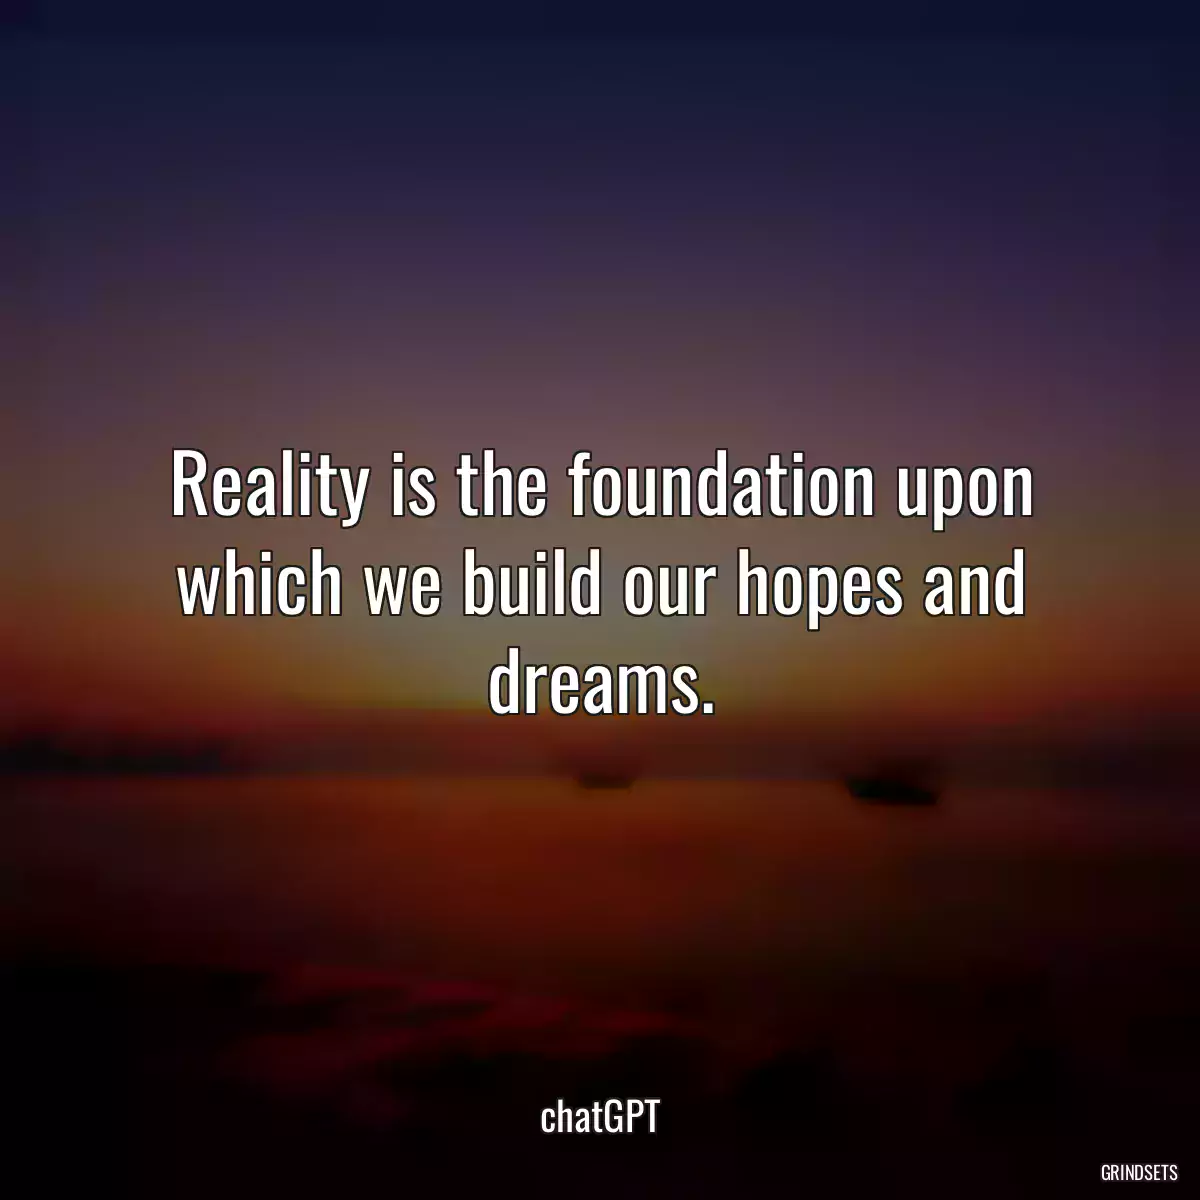 Reality is the foundation upon which we build our hopes and dreams.